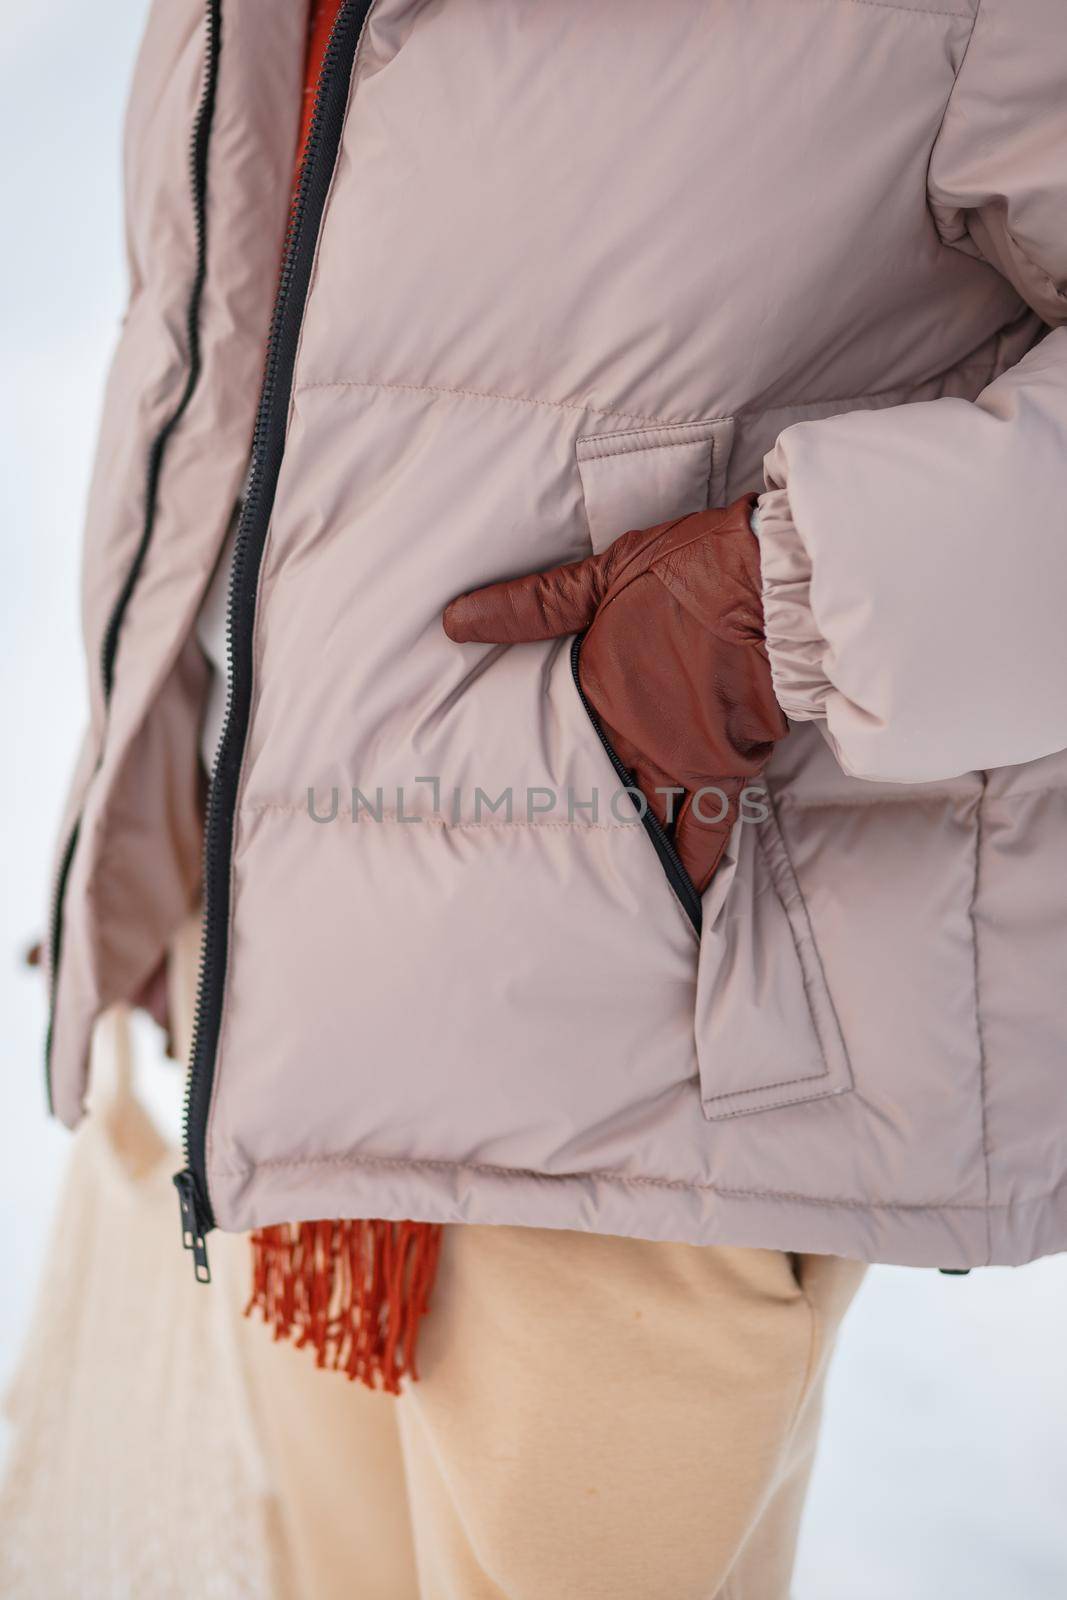 A girl in a winter jacket, a hand in a camran by deandy